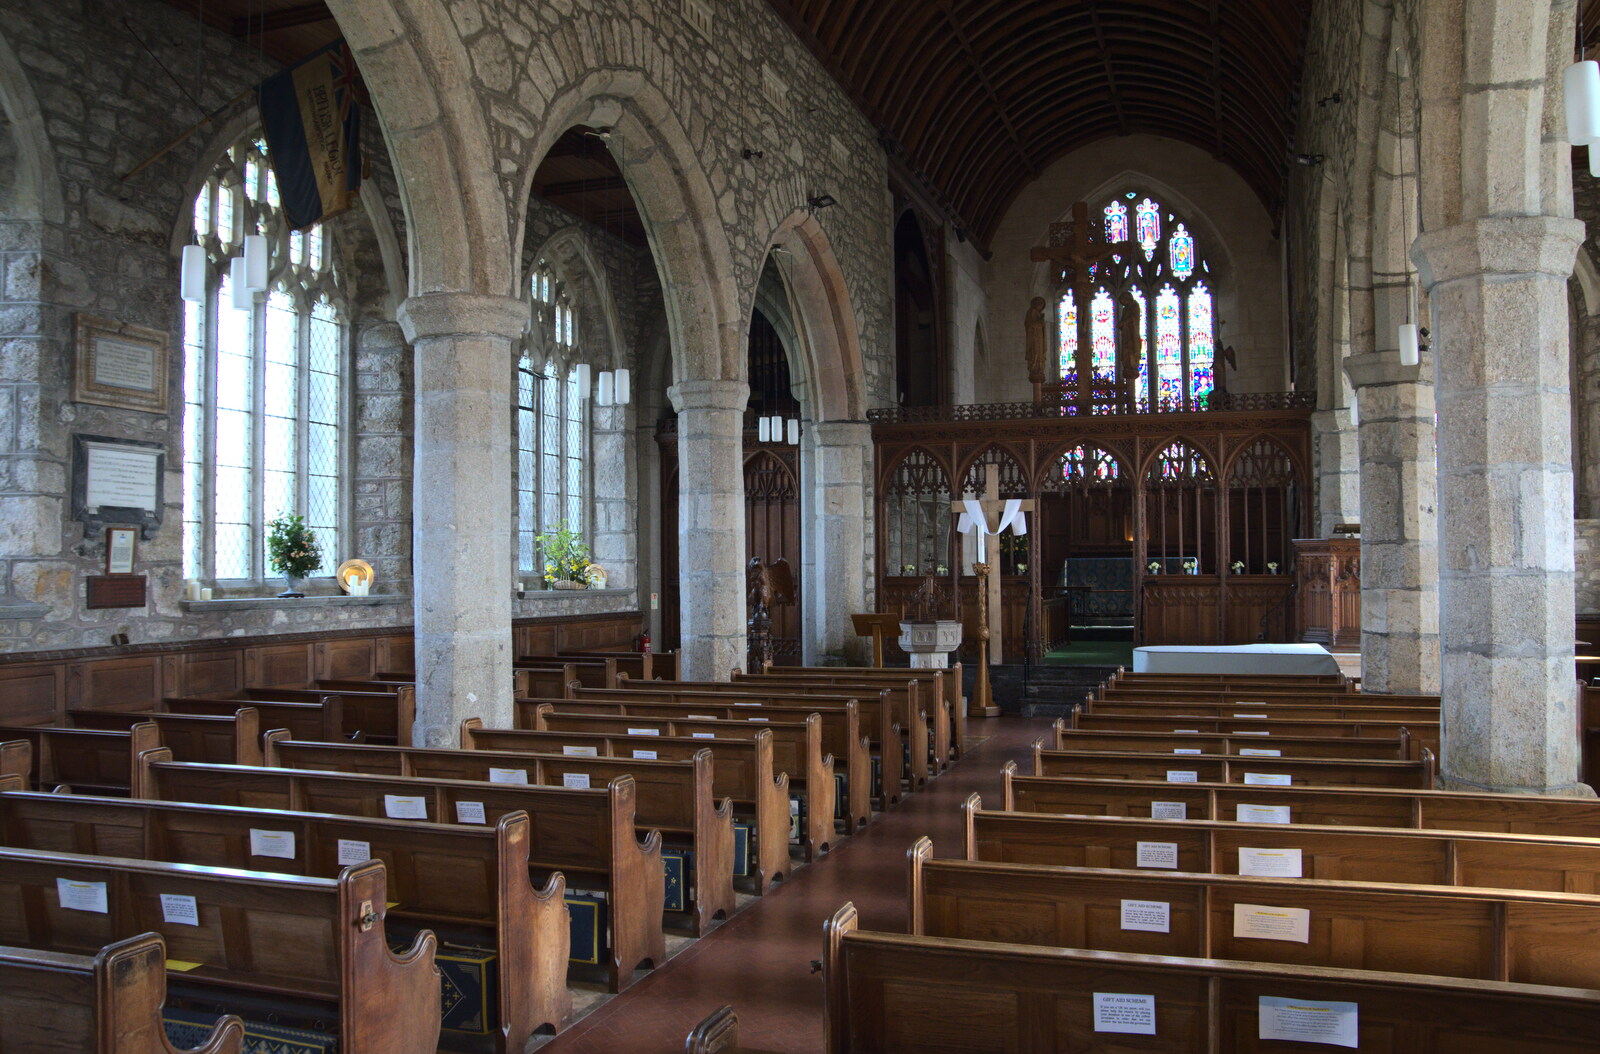 The nave of St. Andrew's Church from Easter in South Zeal and Moretonhampstead, Devon - 9th April